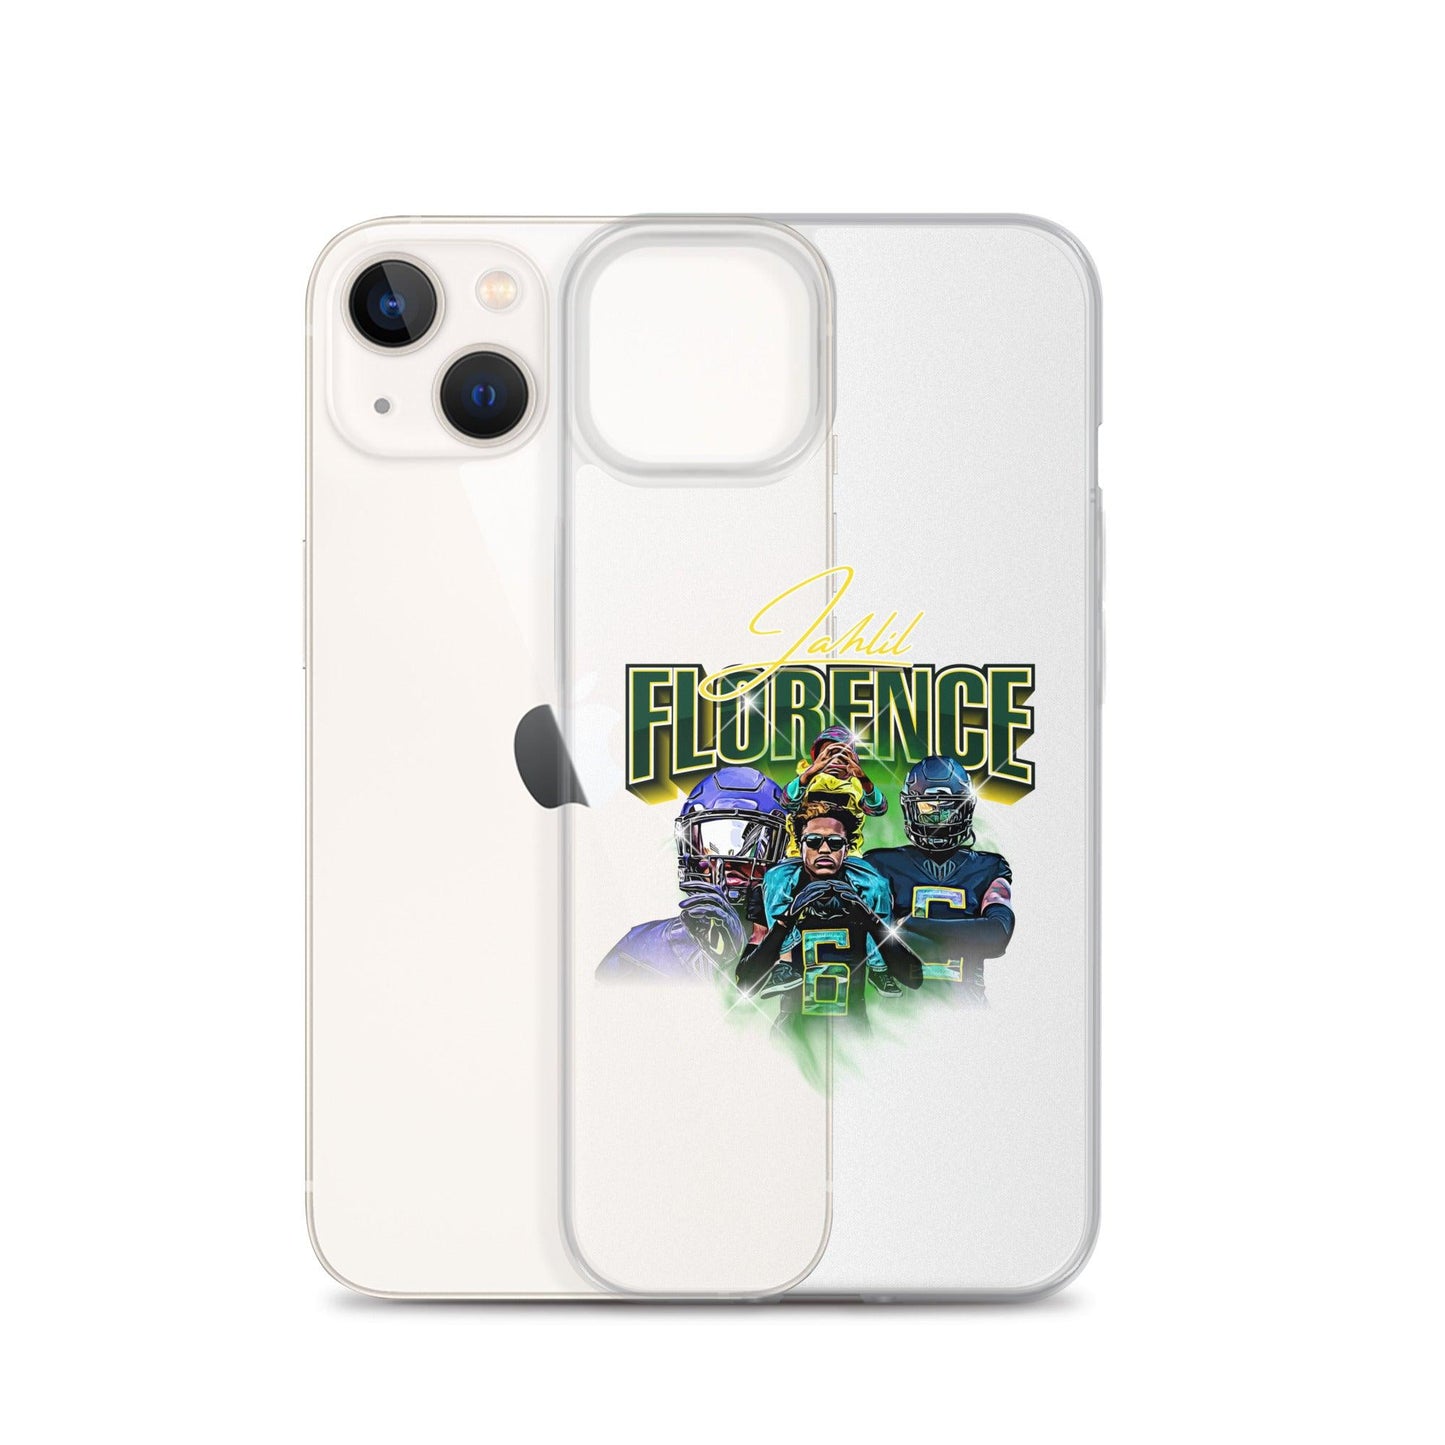 Jahlil Florence “Heritage” iPhone Case - Fan Arch